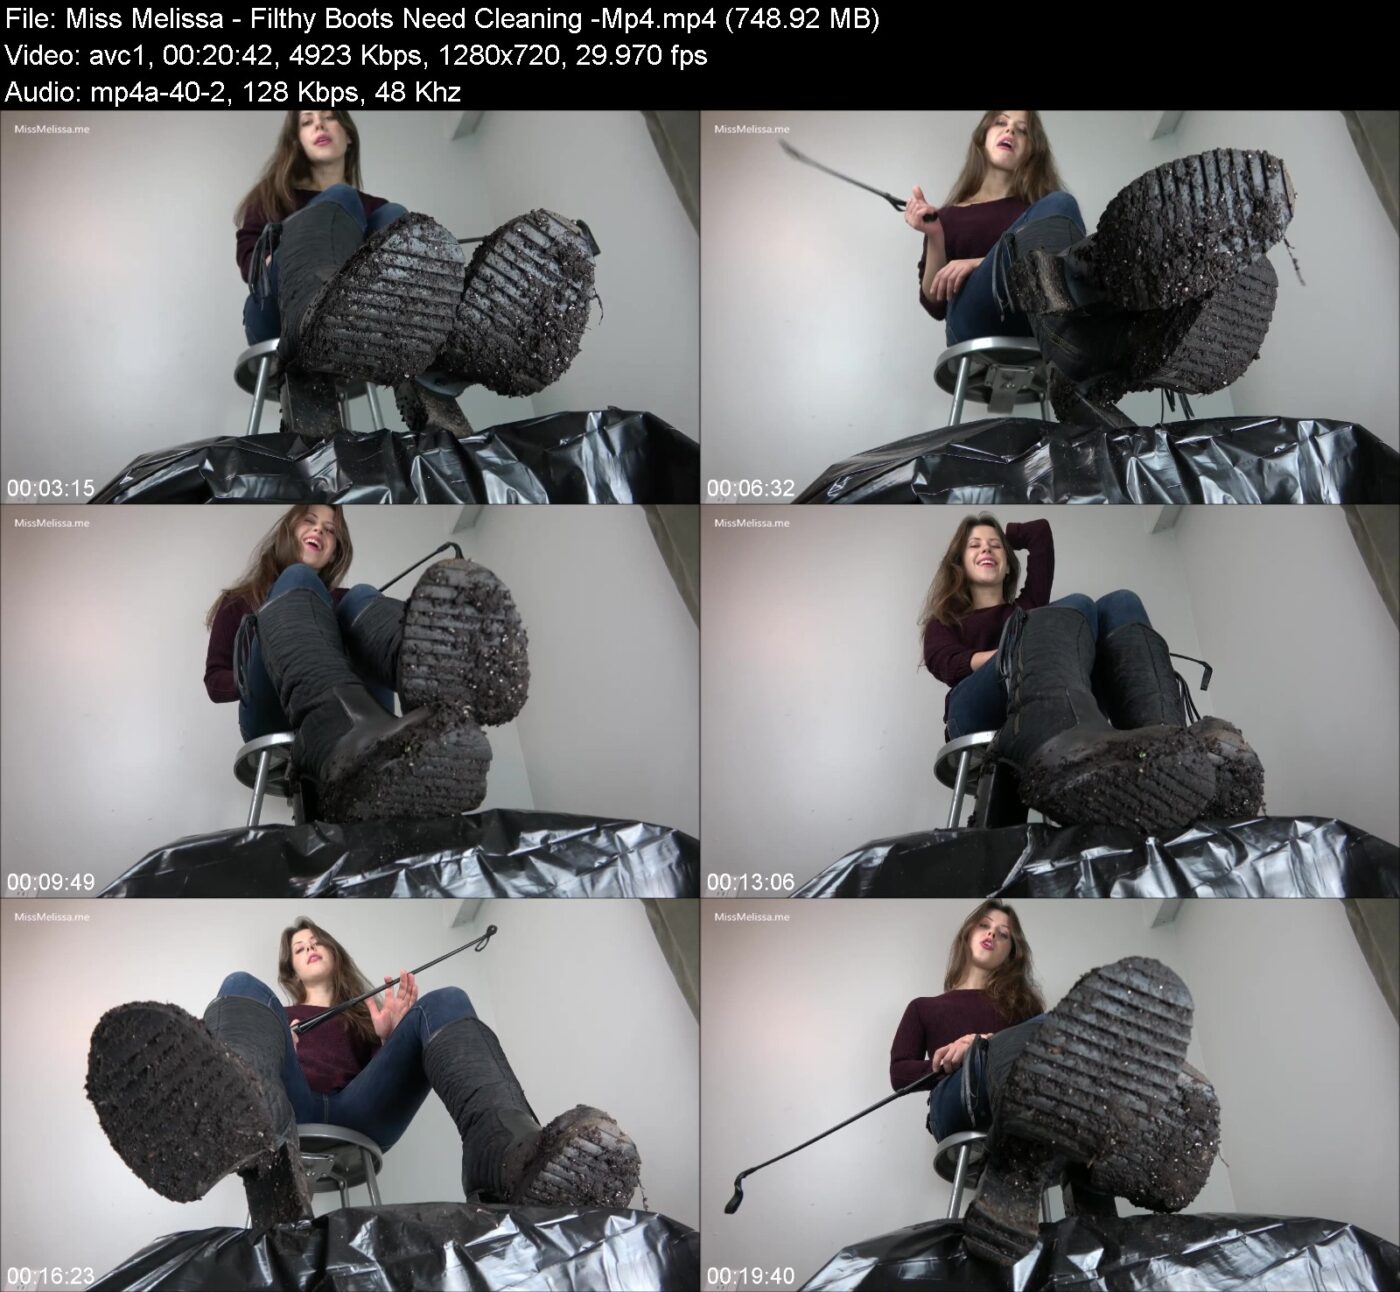 Actress: Miss Melissa. Title and Studio: Filthy Boots Need Cleaning -Mp4